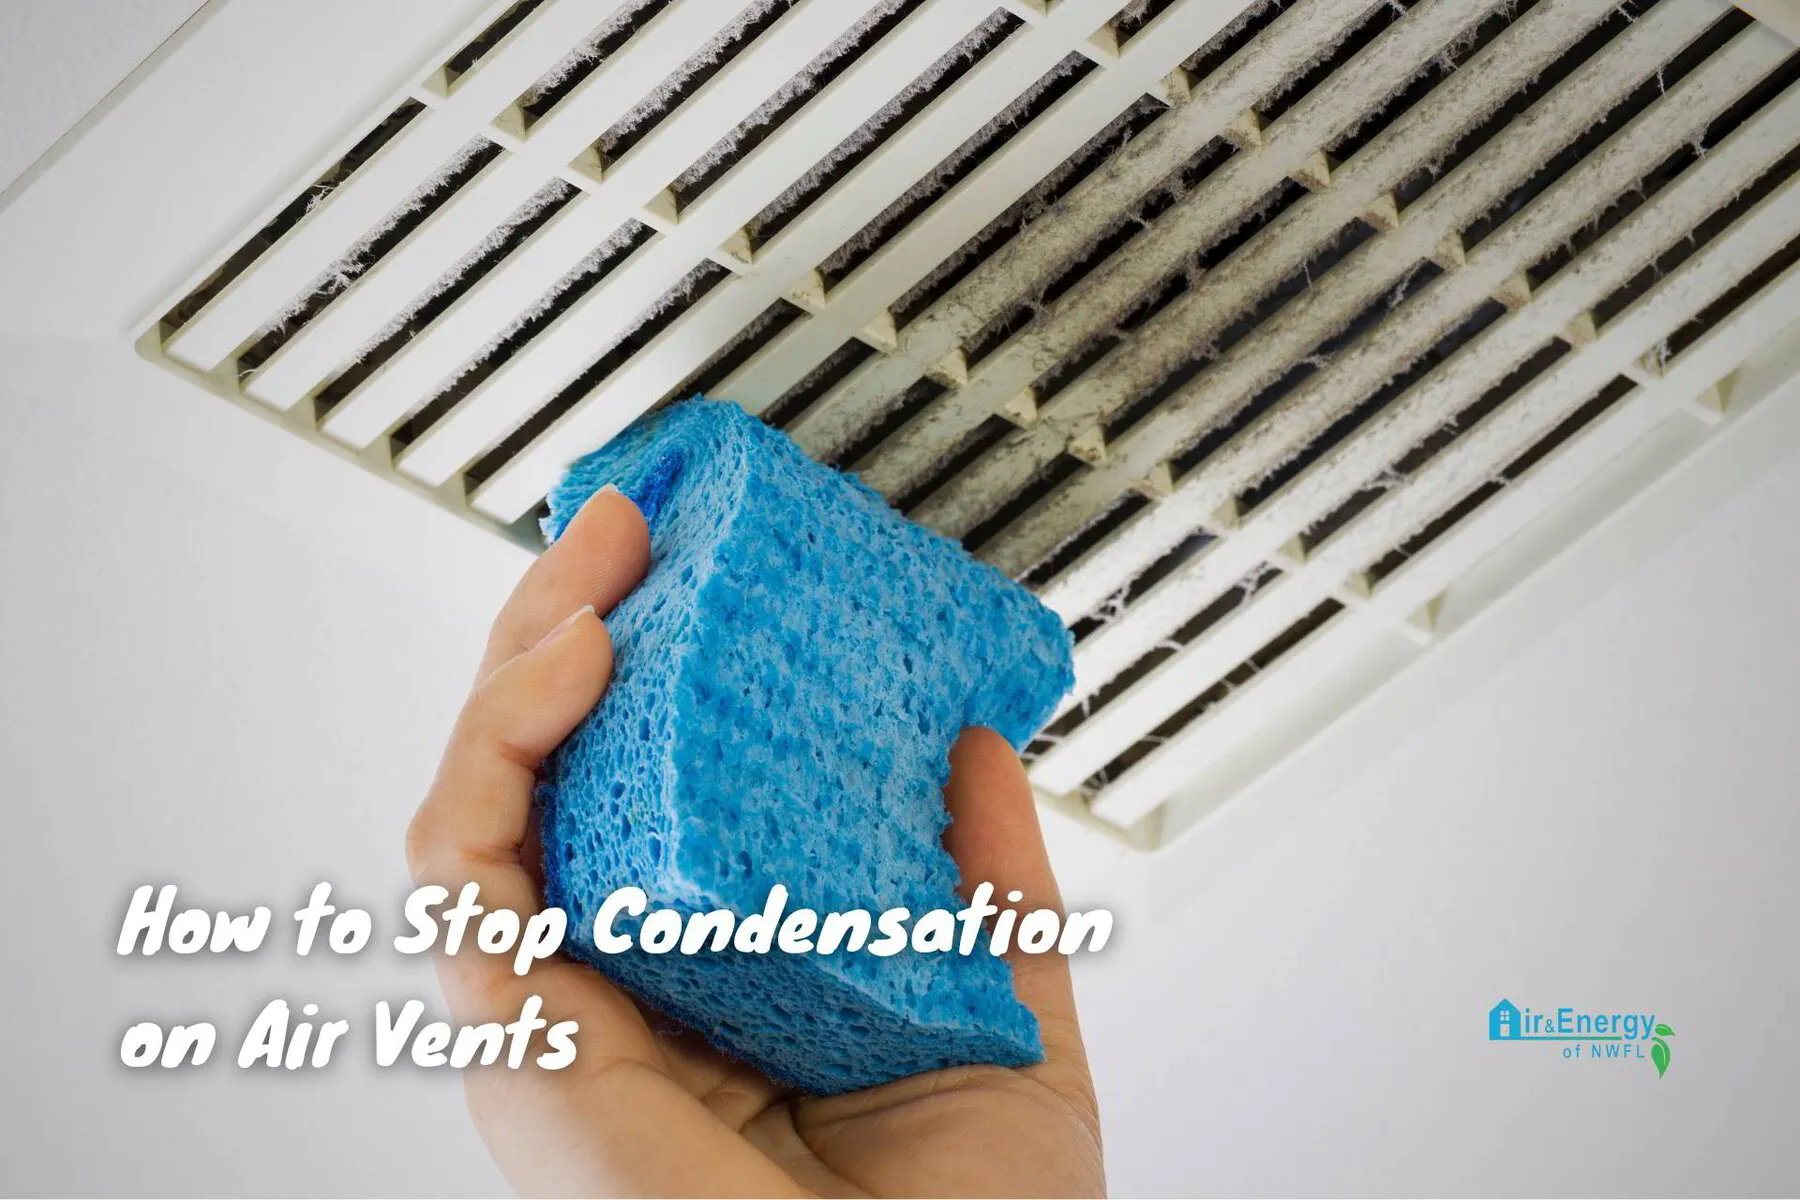 Effective Strategies: How to Stop Condensation on Air Vents | Air &amp; Energy of NWFL